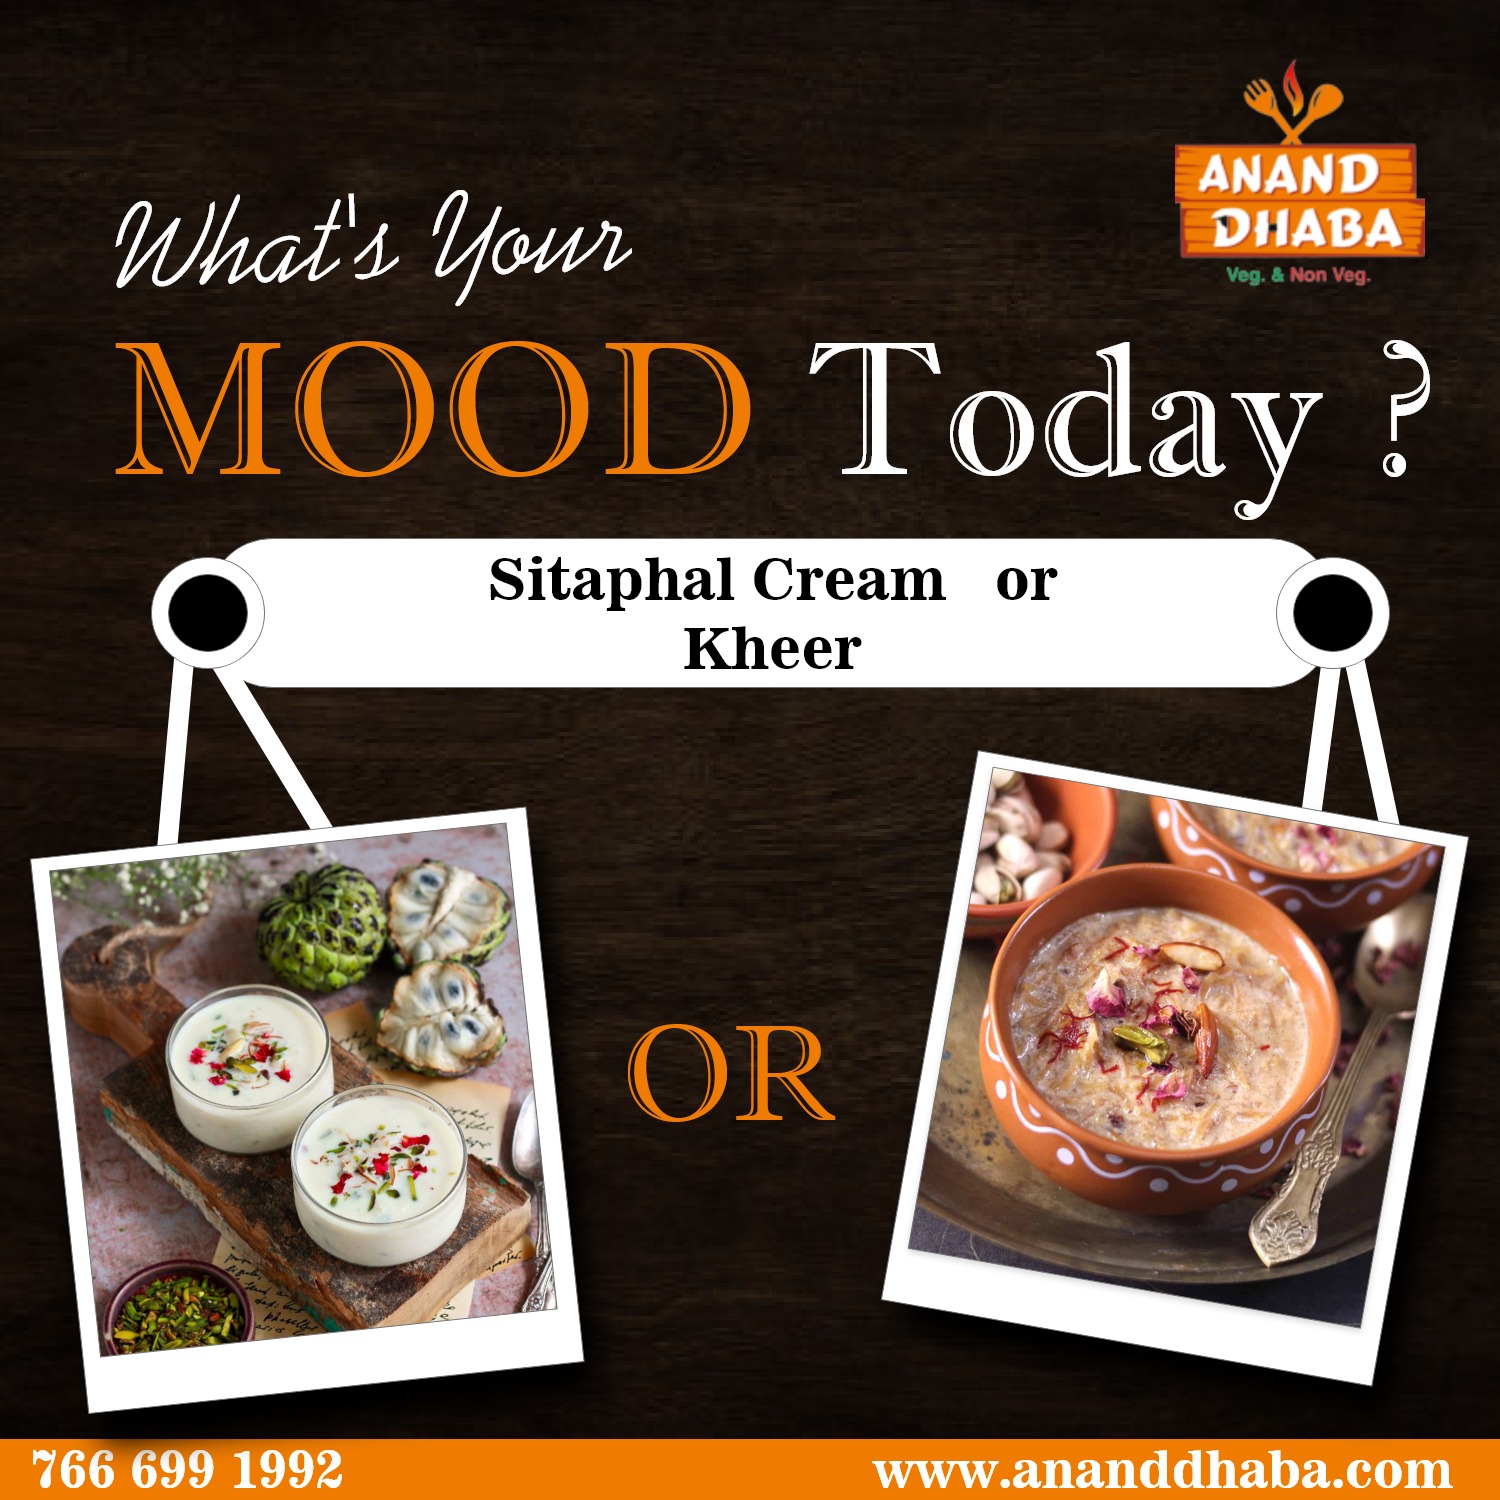 t's Your Mood Today - Sitaphal Cream or Kheer